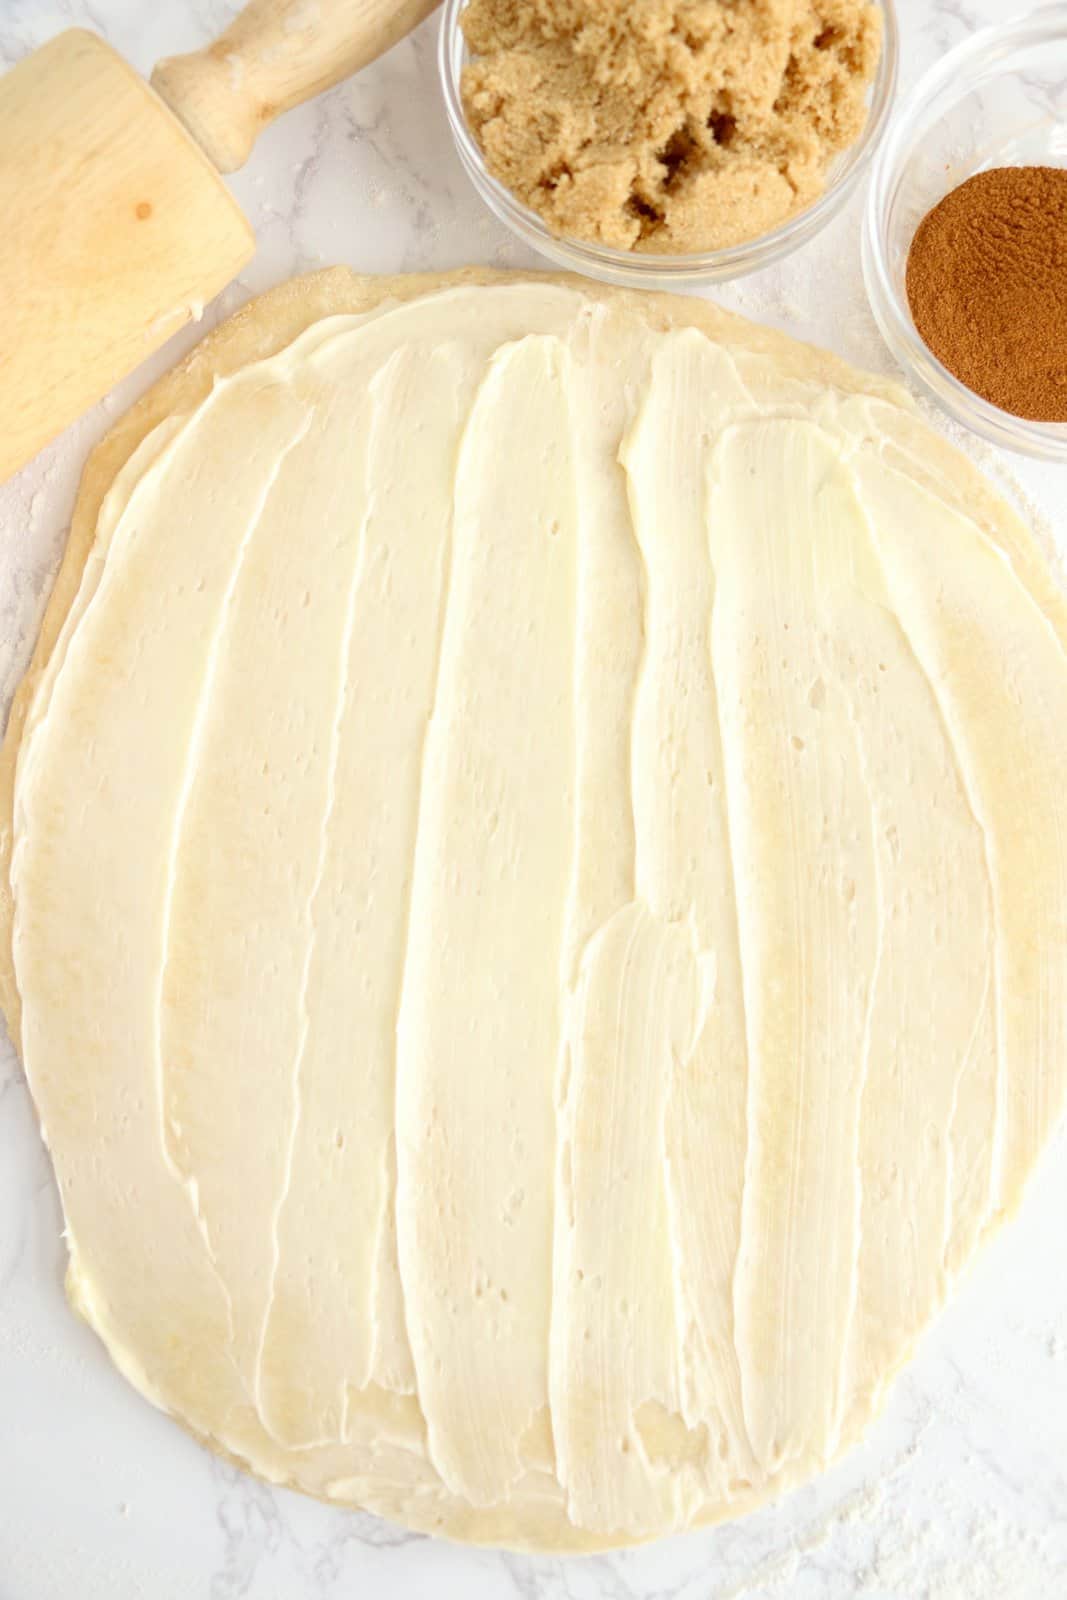 Butter spread out over rolled out dough.